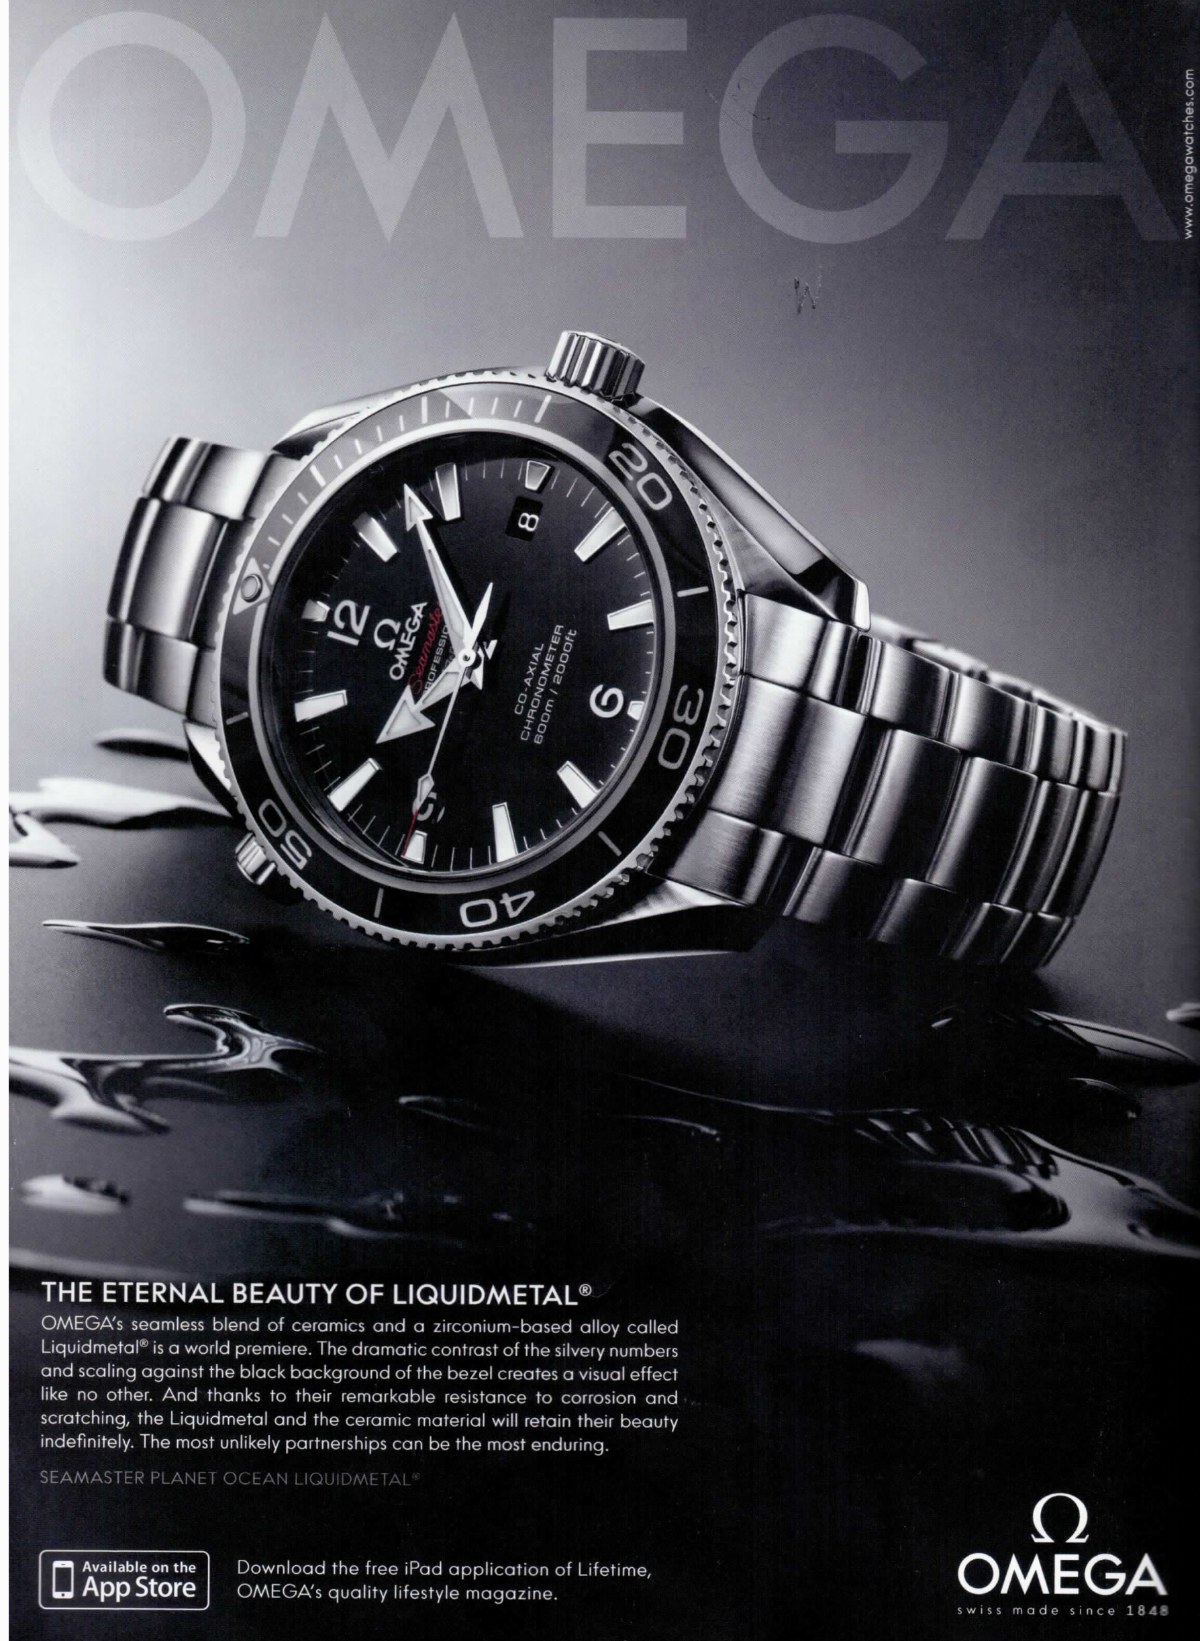 Selling Watches The "Wired" Way | aBlogtoWatch